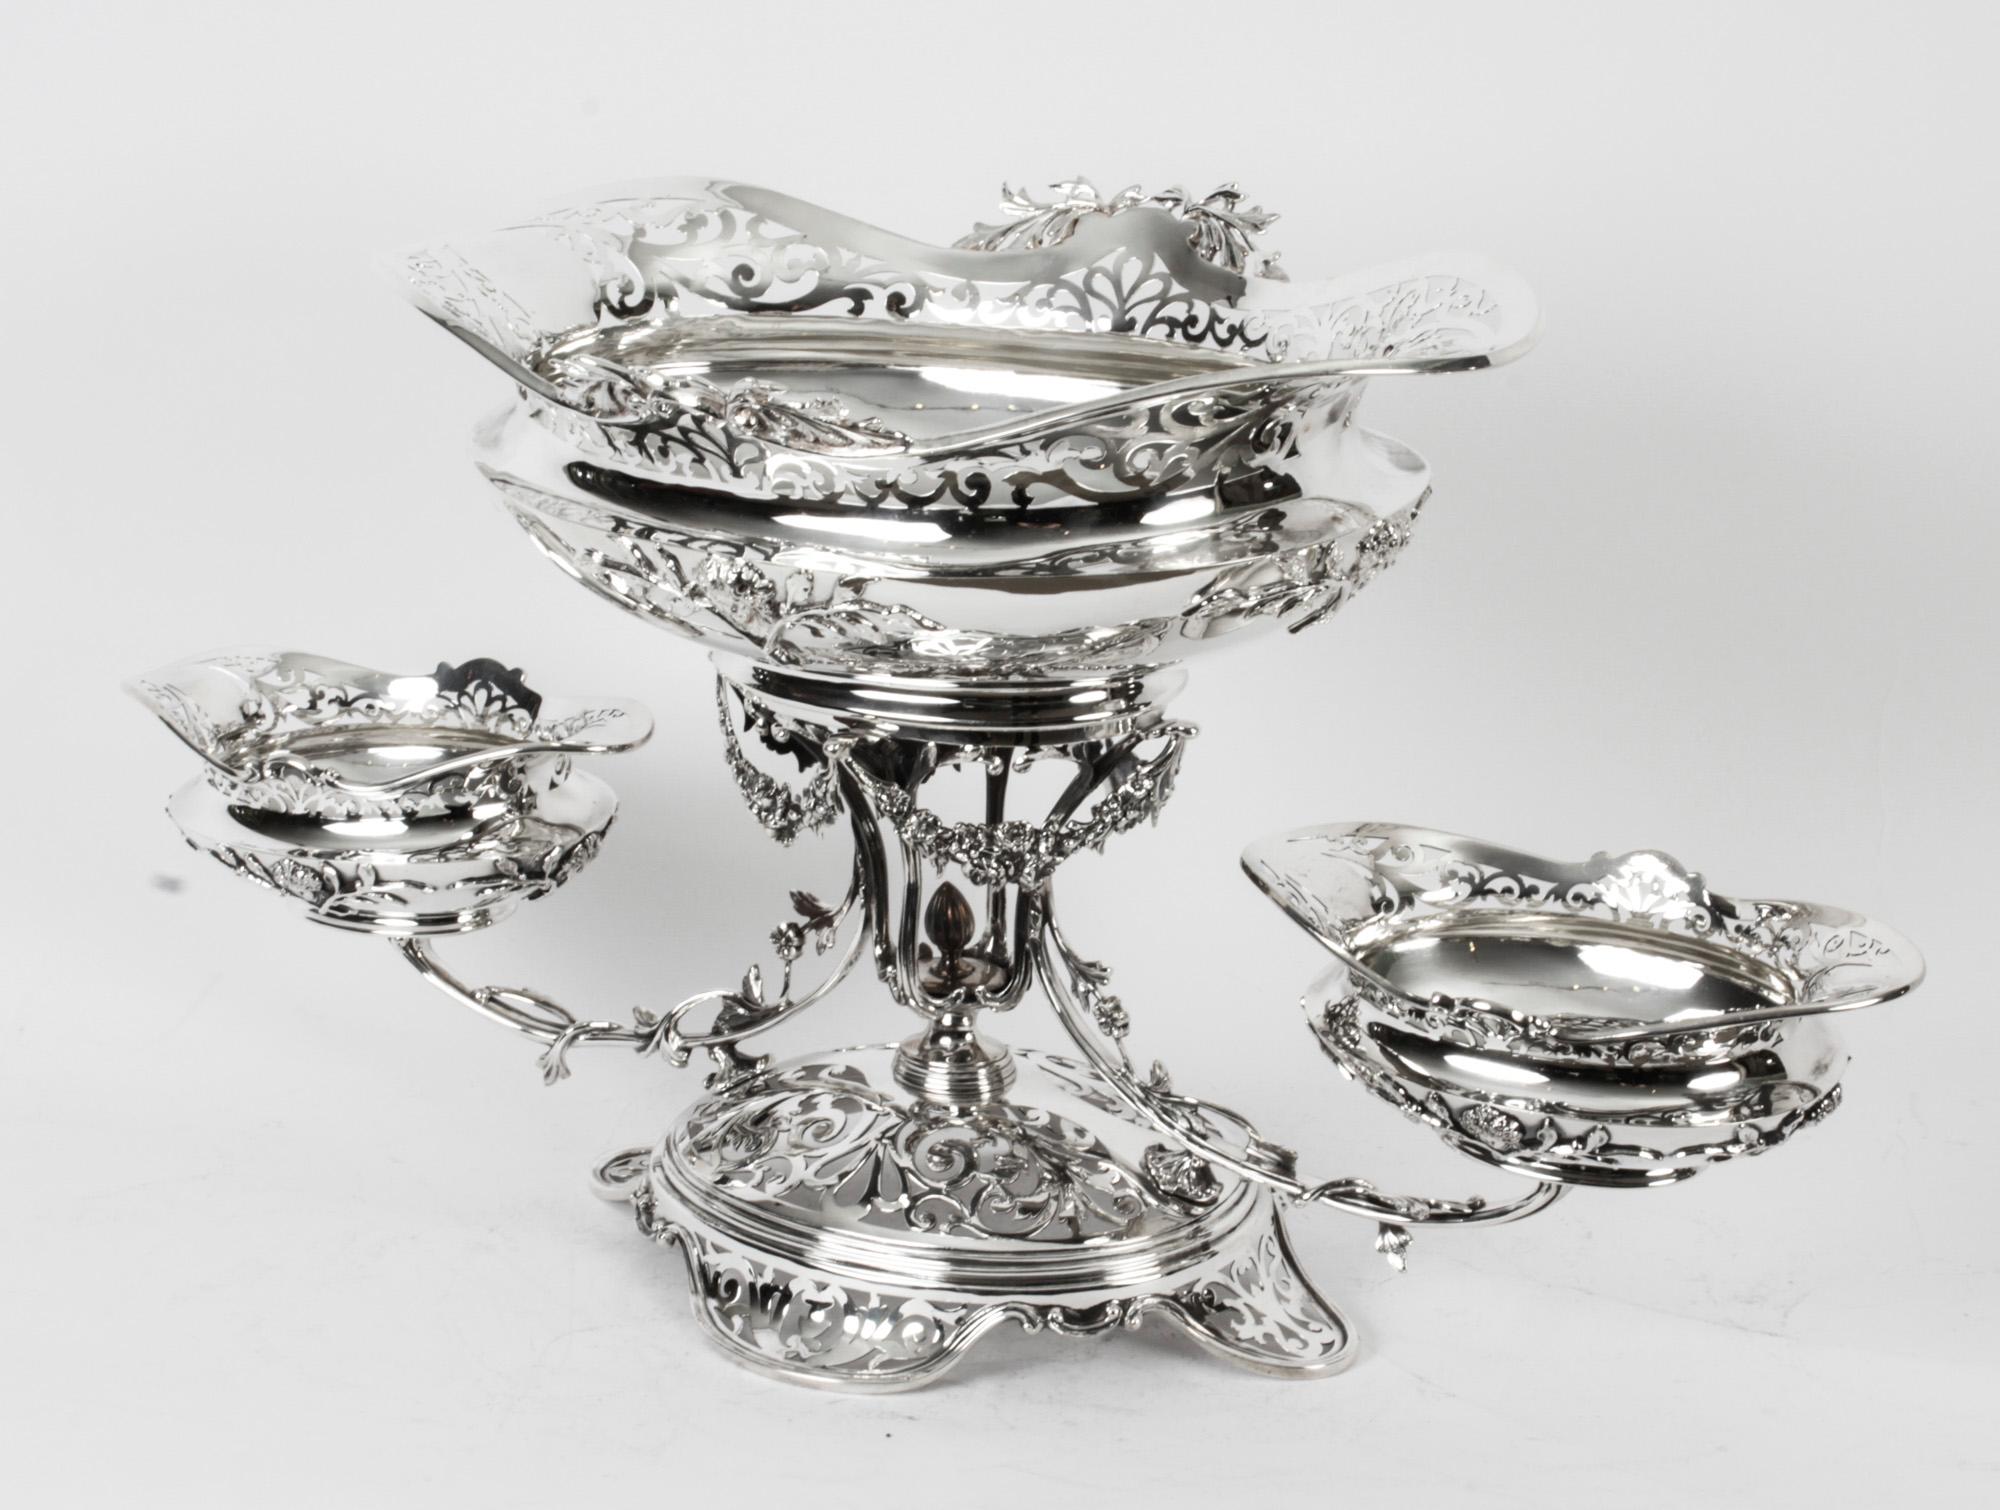 Antique Victorian Silverplate Centrepiece Mappin & Webb 1880 19th Century For Sale 6